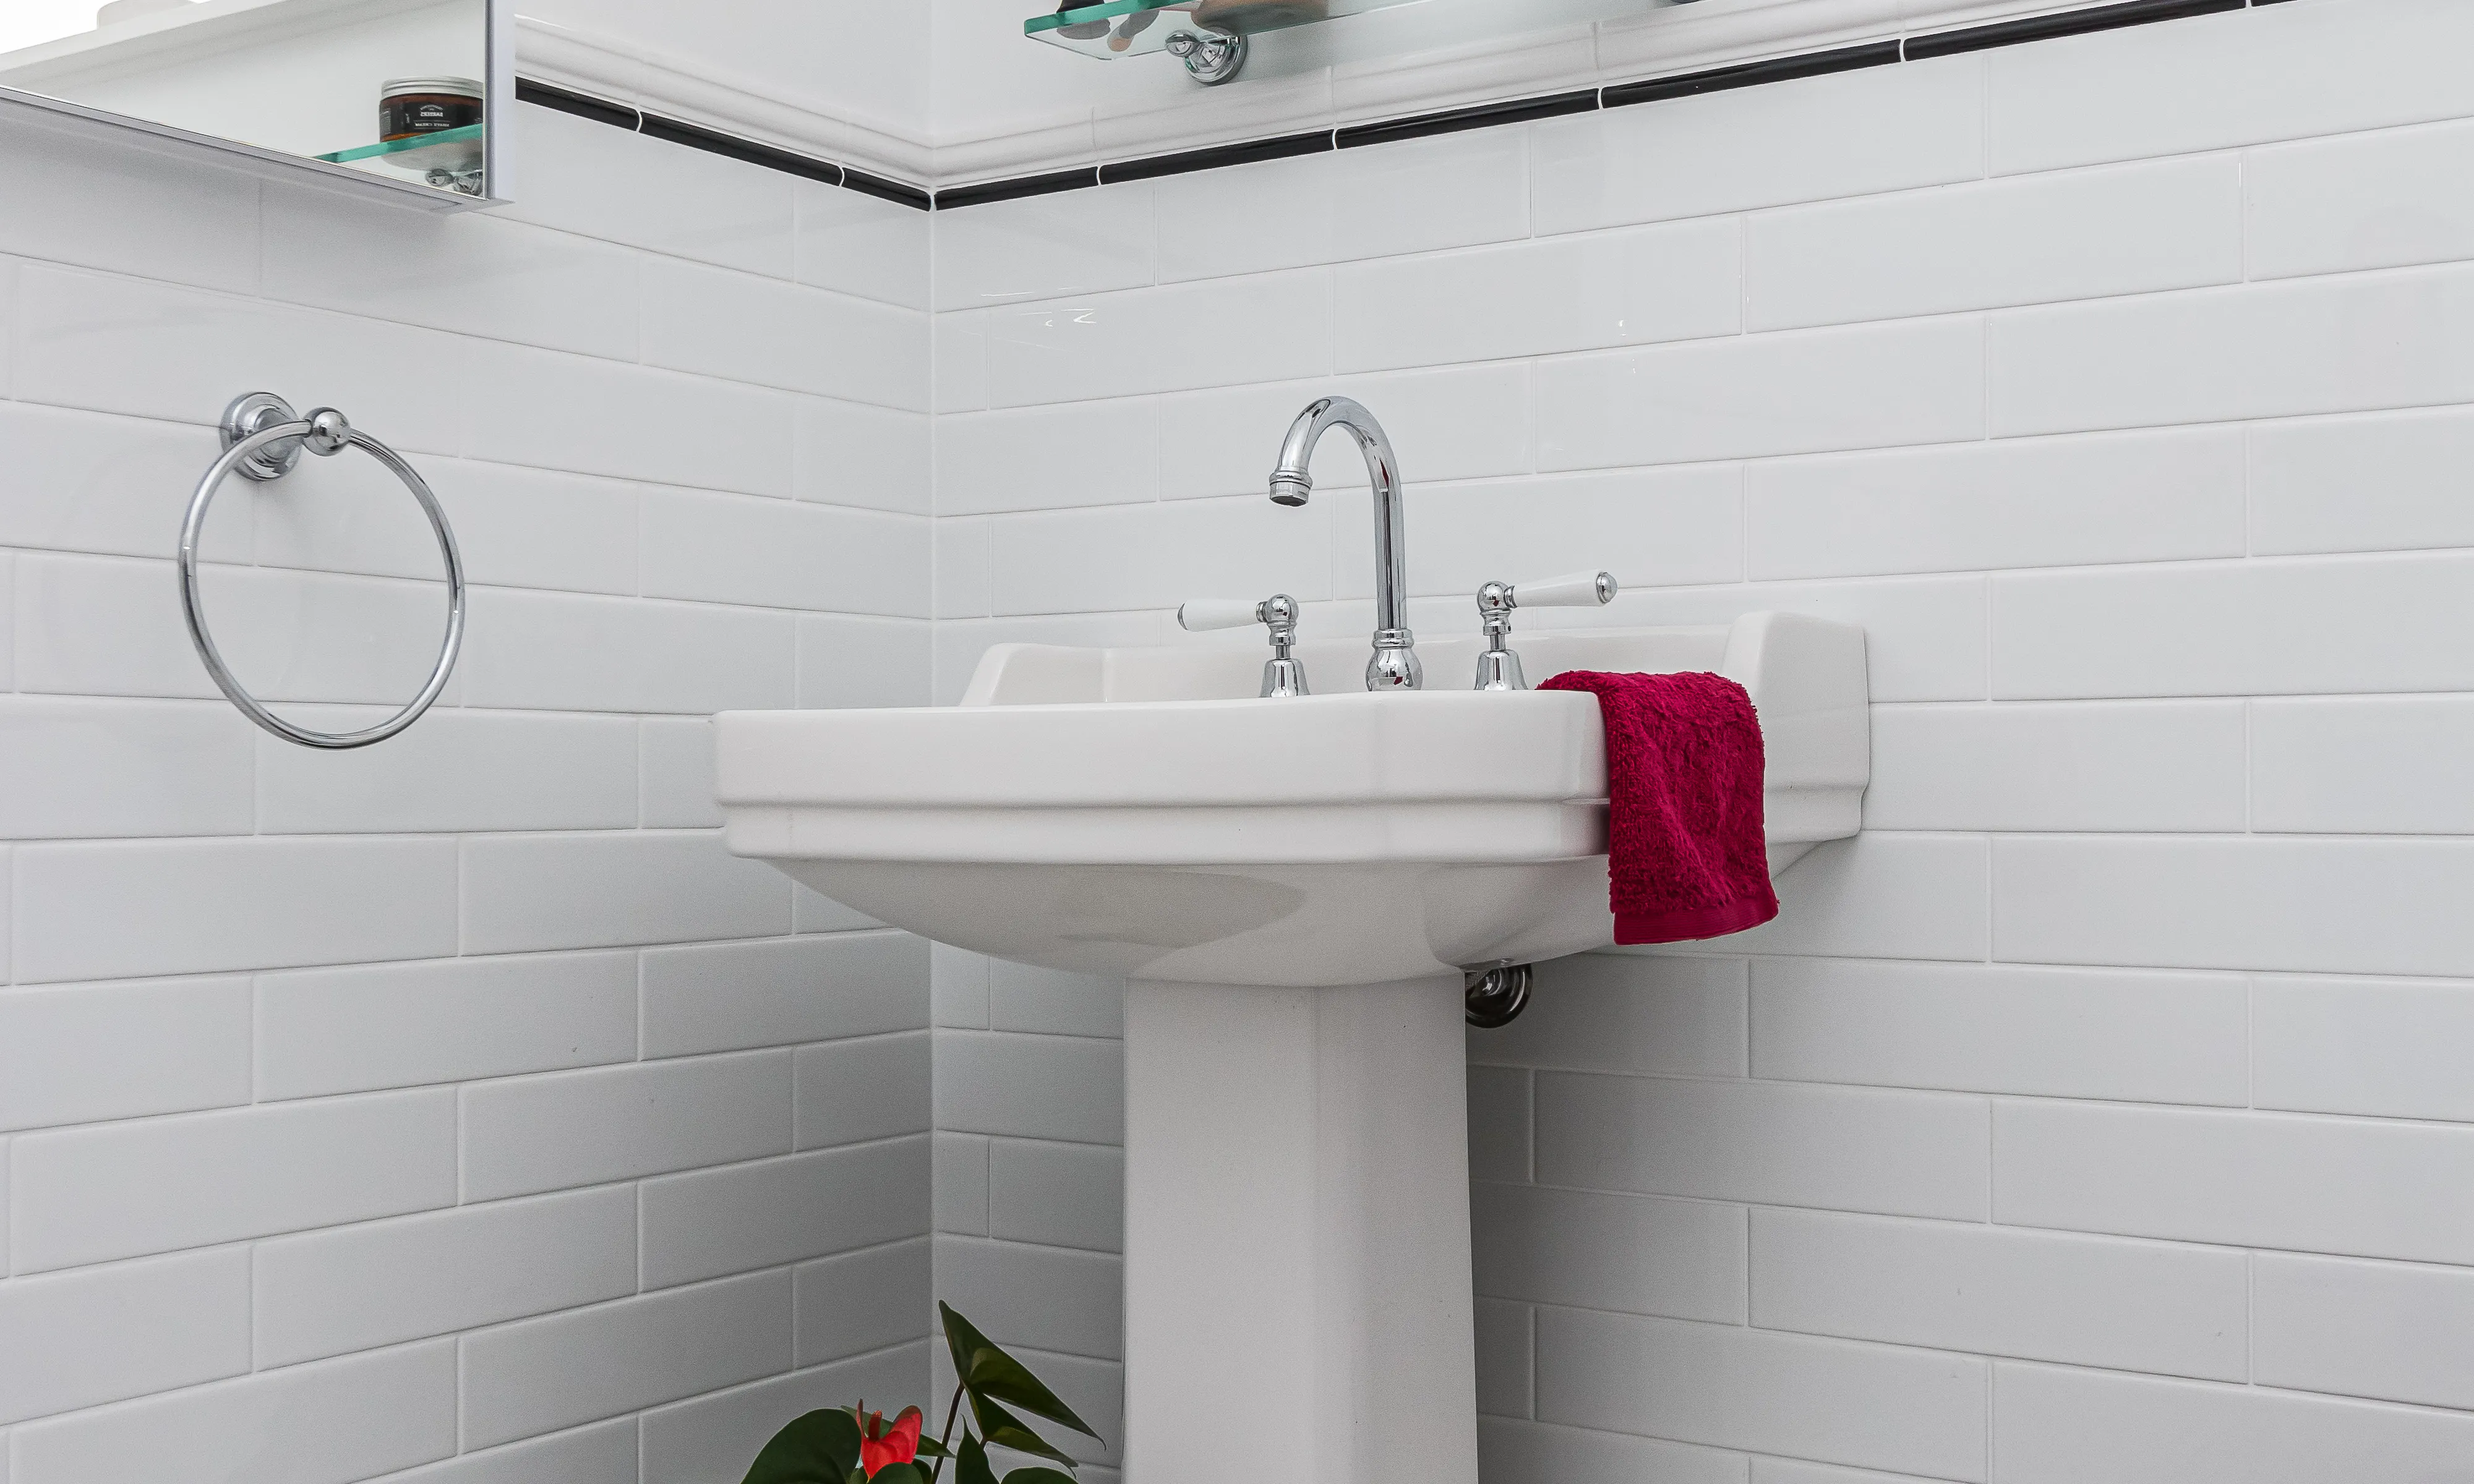 Pedestal Basin and black and white tiles in bathroom